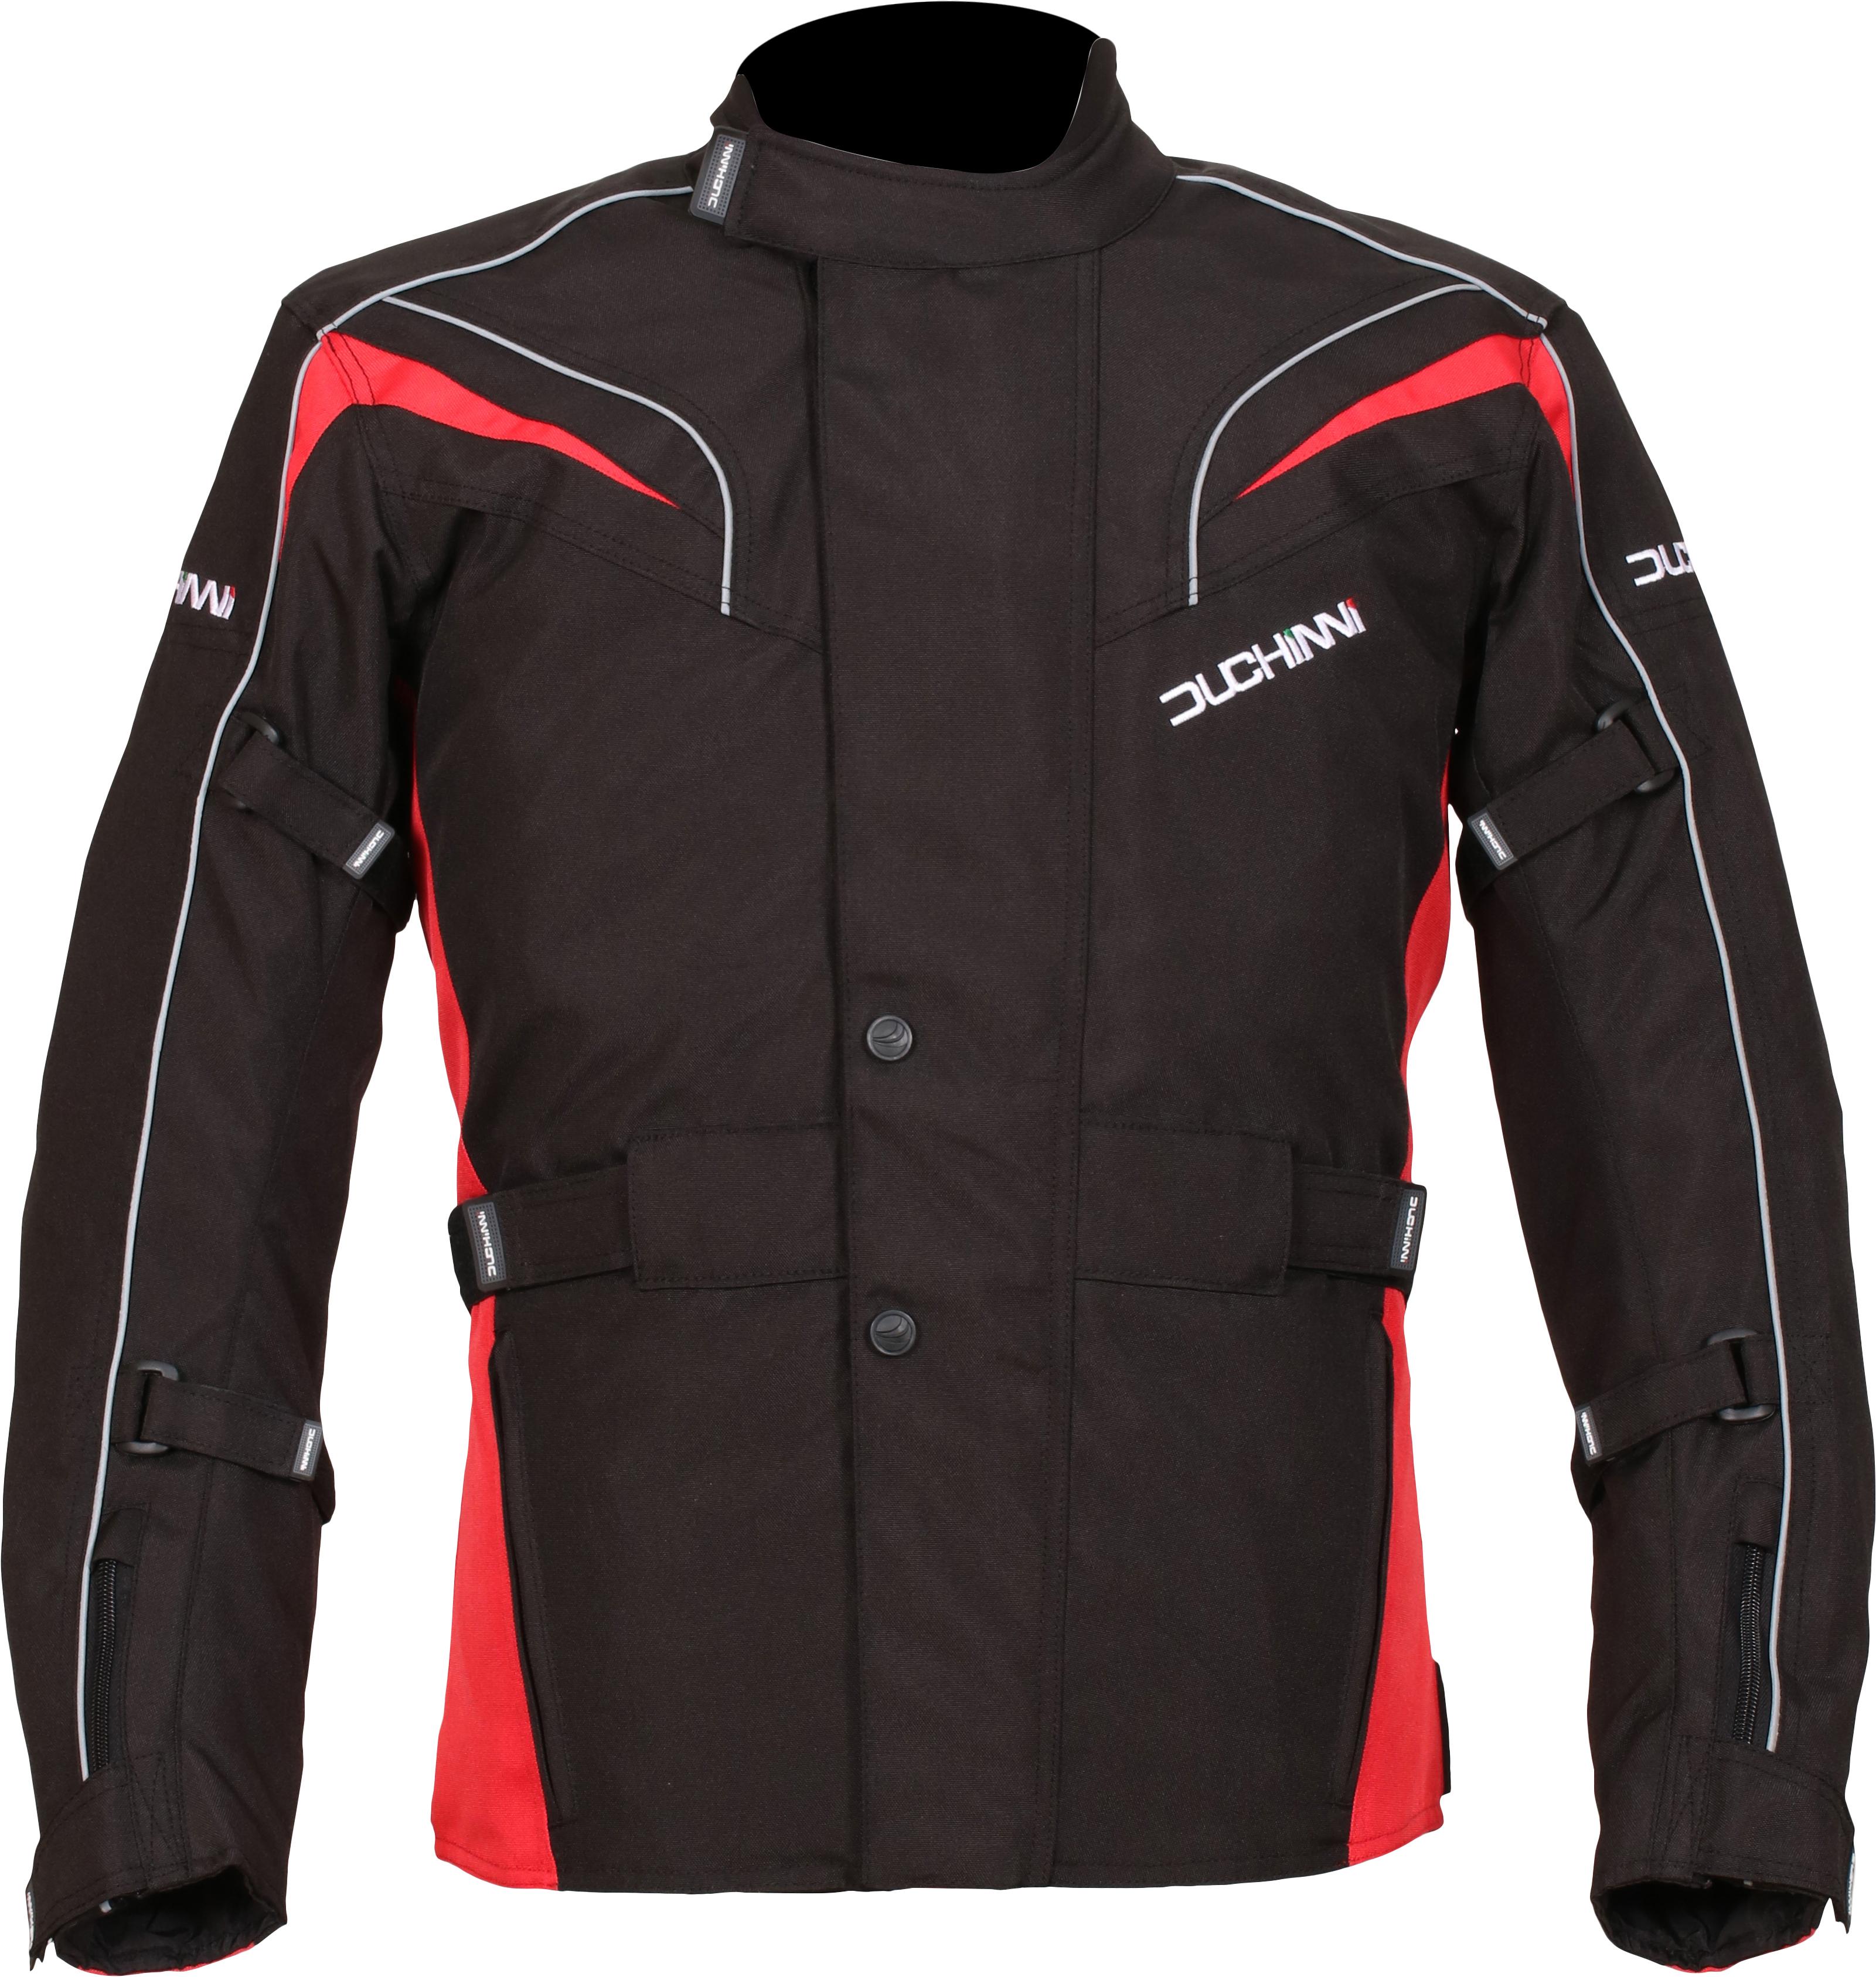 Duchinni Hurrican Motorcycle Jacket - Black And Red, Xl